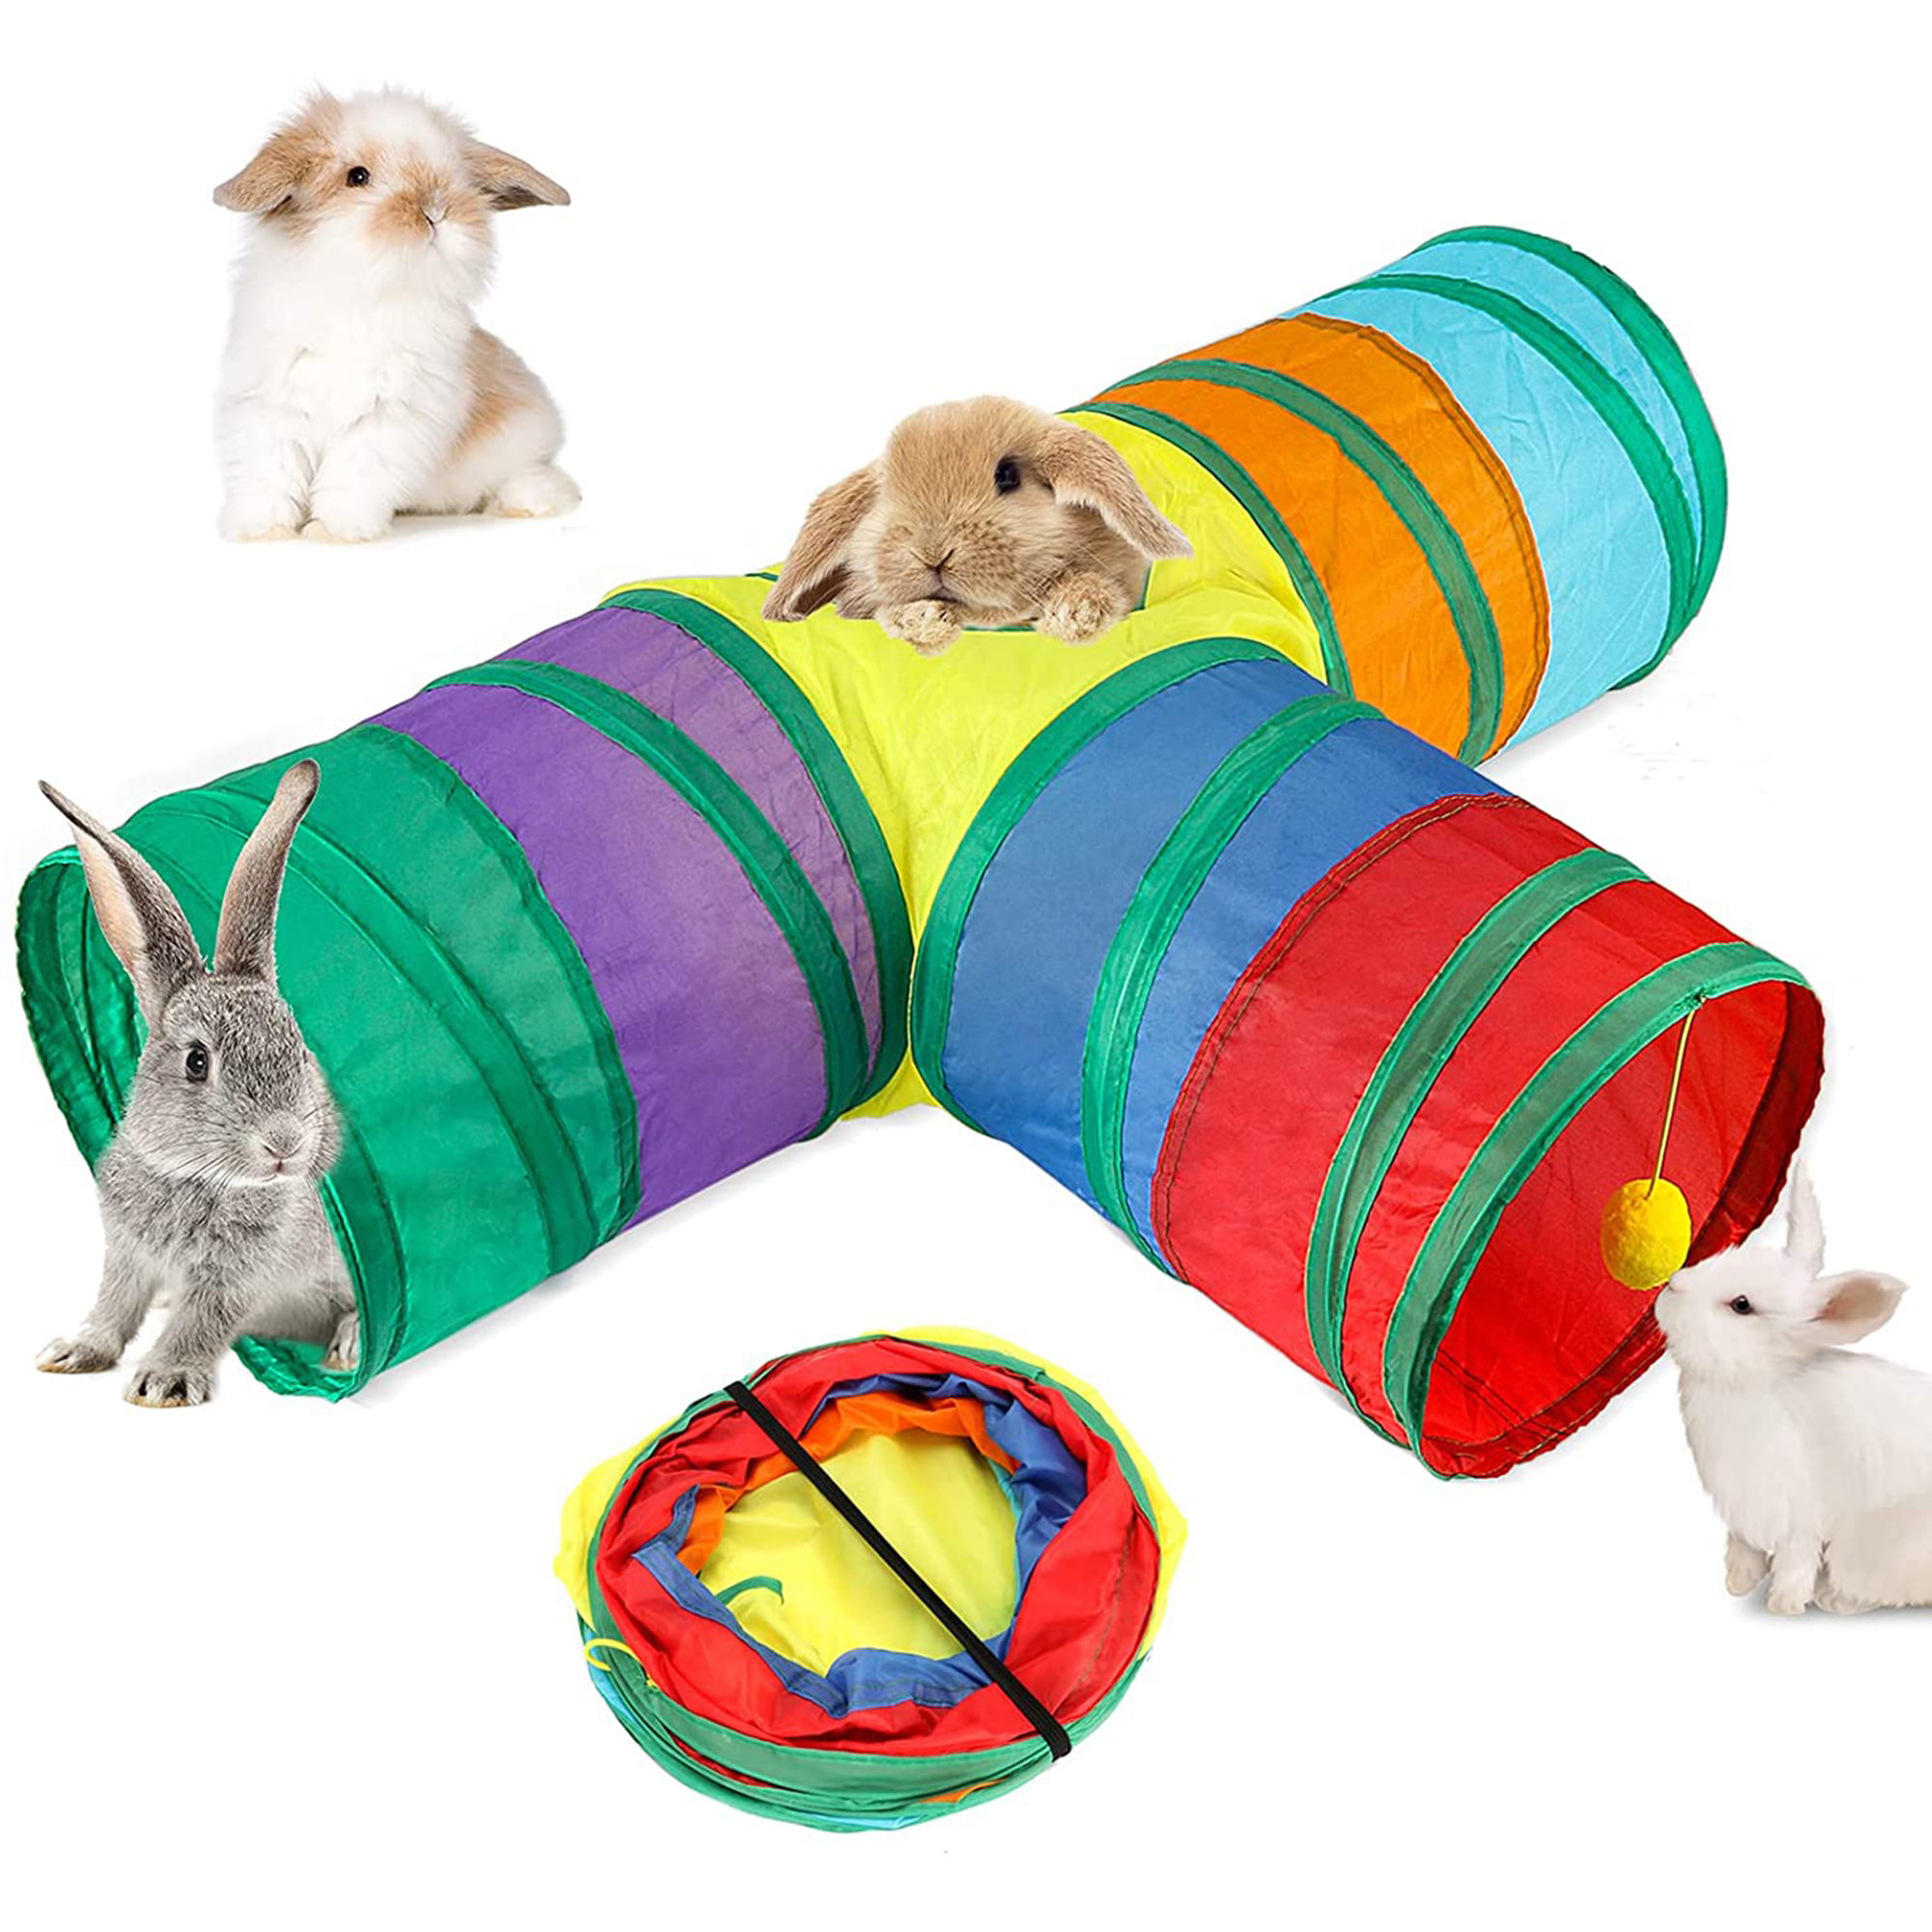 Tiibot 4 Packs Collapsible Rabbit Toys 3 Way Bunny Tunnel Chew Toys Large Bunny Hideout Tunnel Small Animal Activity Tunnel Toys for Rabbits Pig Ferret Guinea 